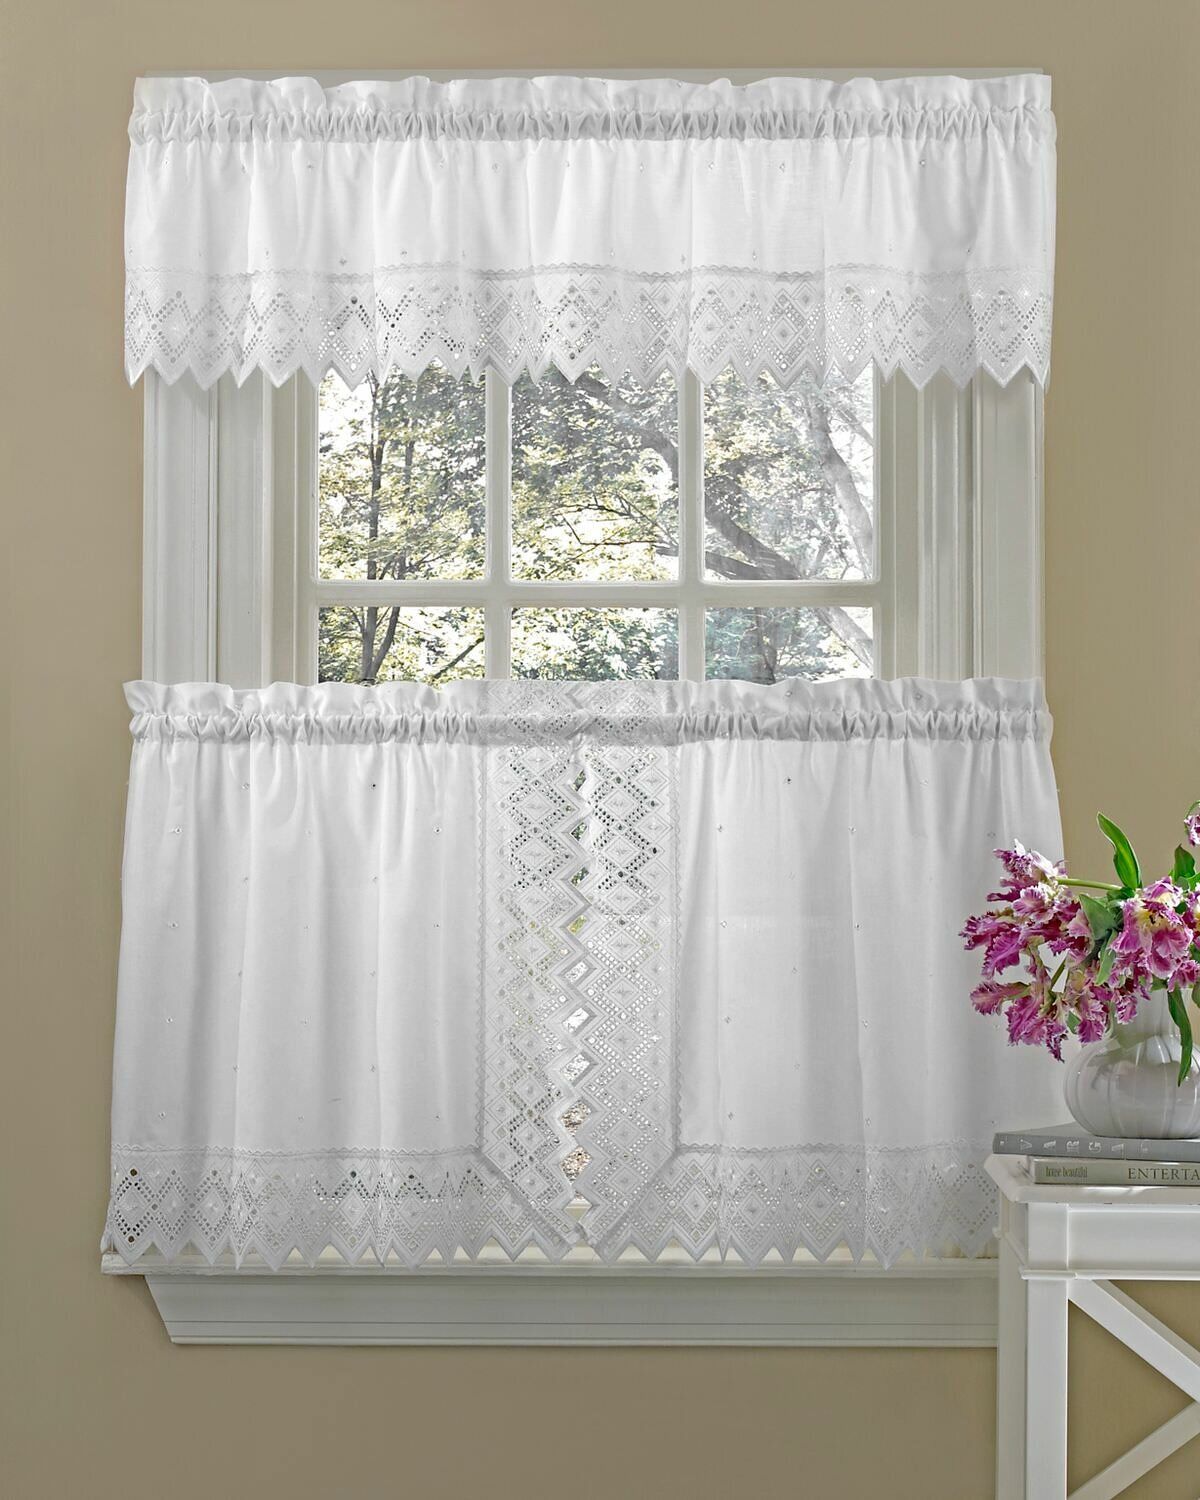 Housley Ornate Elegance Poly Cotton Embroidered Tailored Swag 70" Kitchen  Curtain For Floral Embroidered Sheer Kitchen Curtain Tiers, Swags And Valances (View 10 of 20)